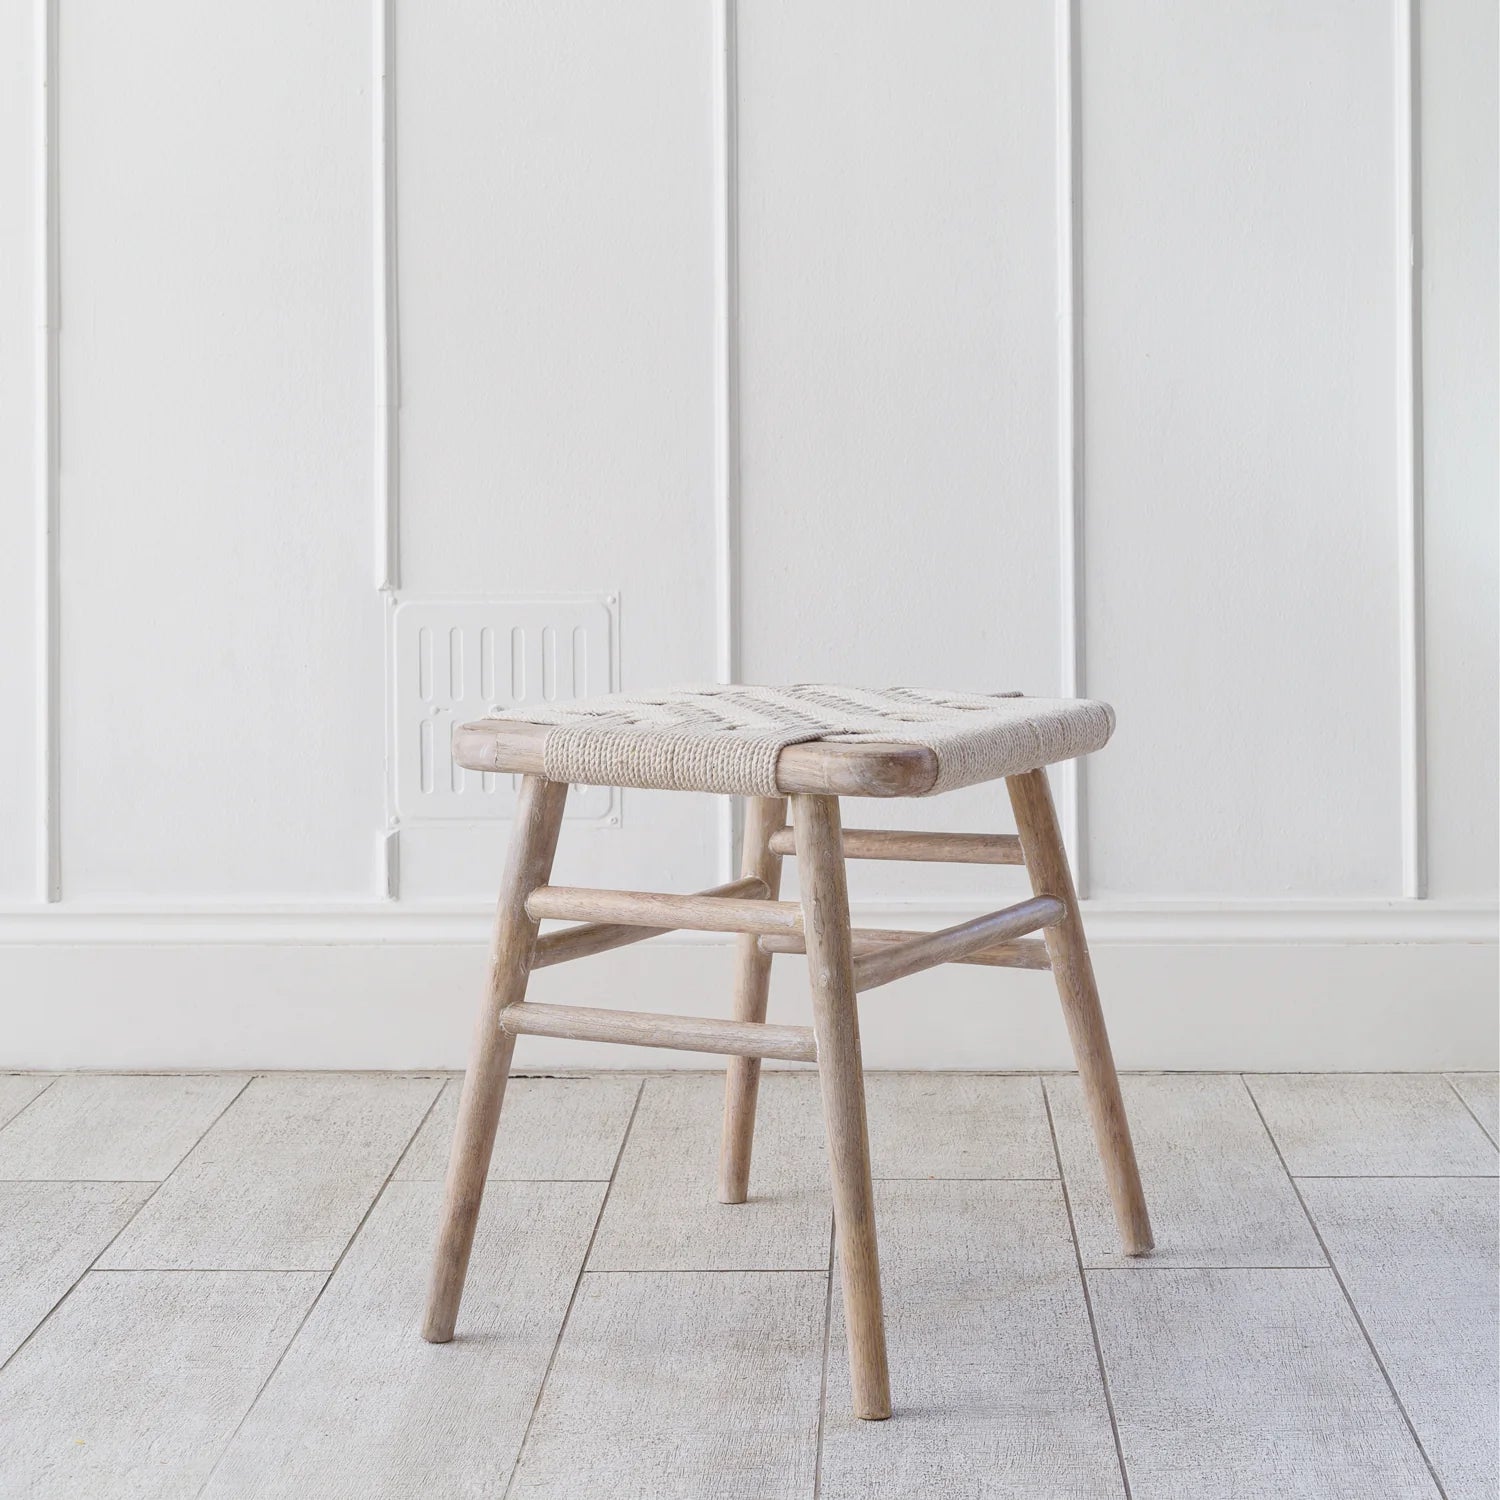 Lulworth Rustic Wooden Stool against a white panelled wall an wooden floor. 